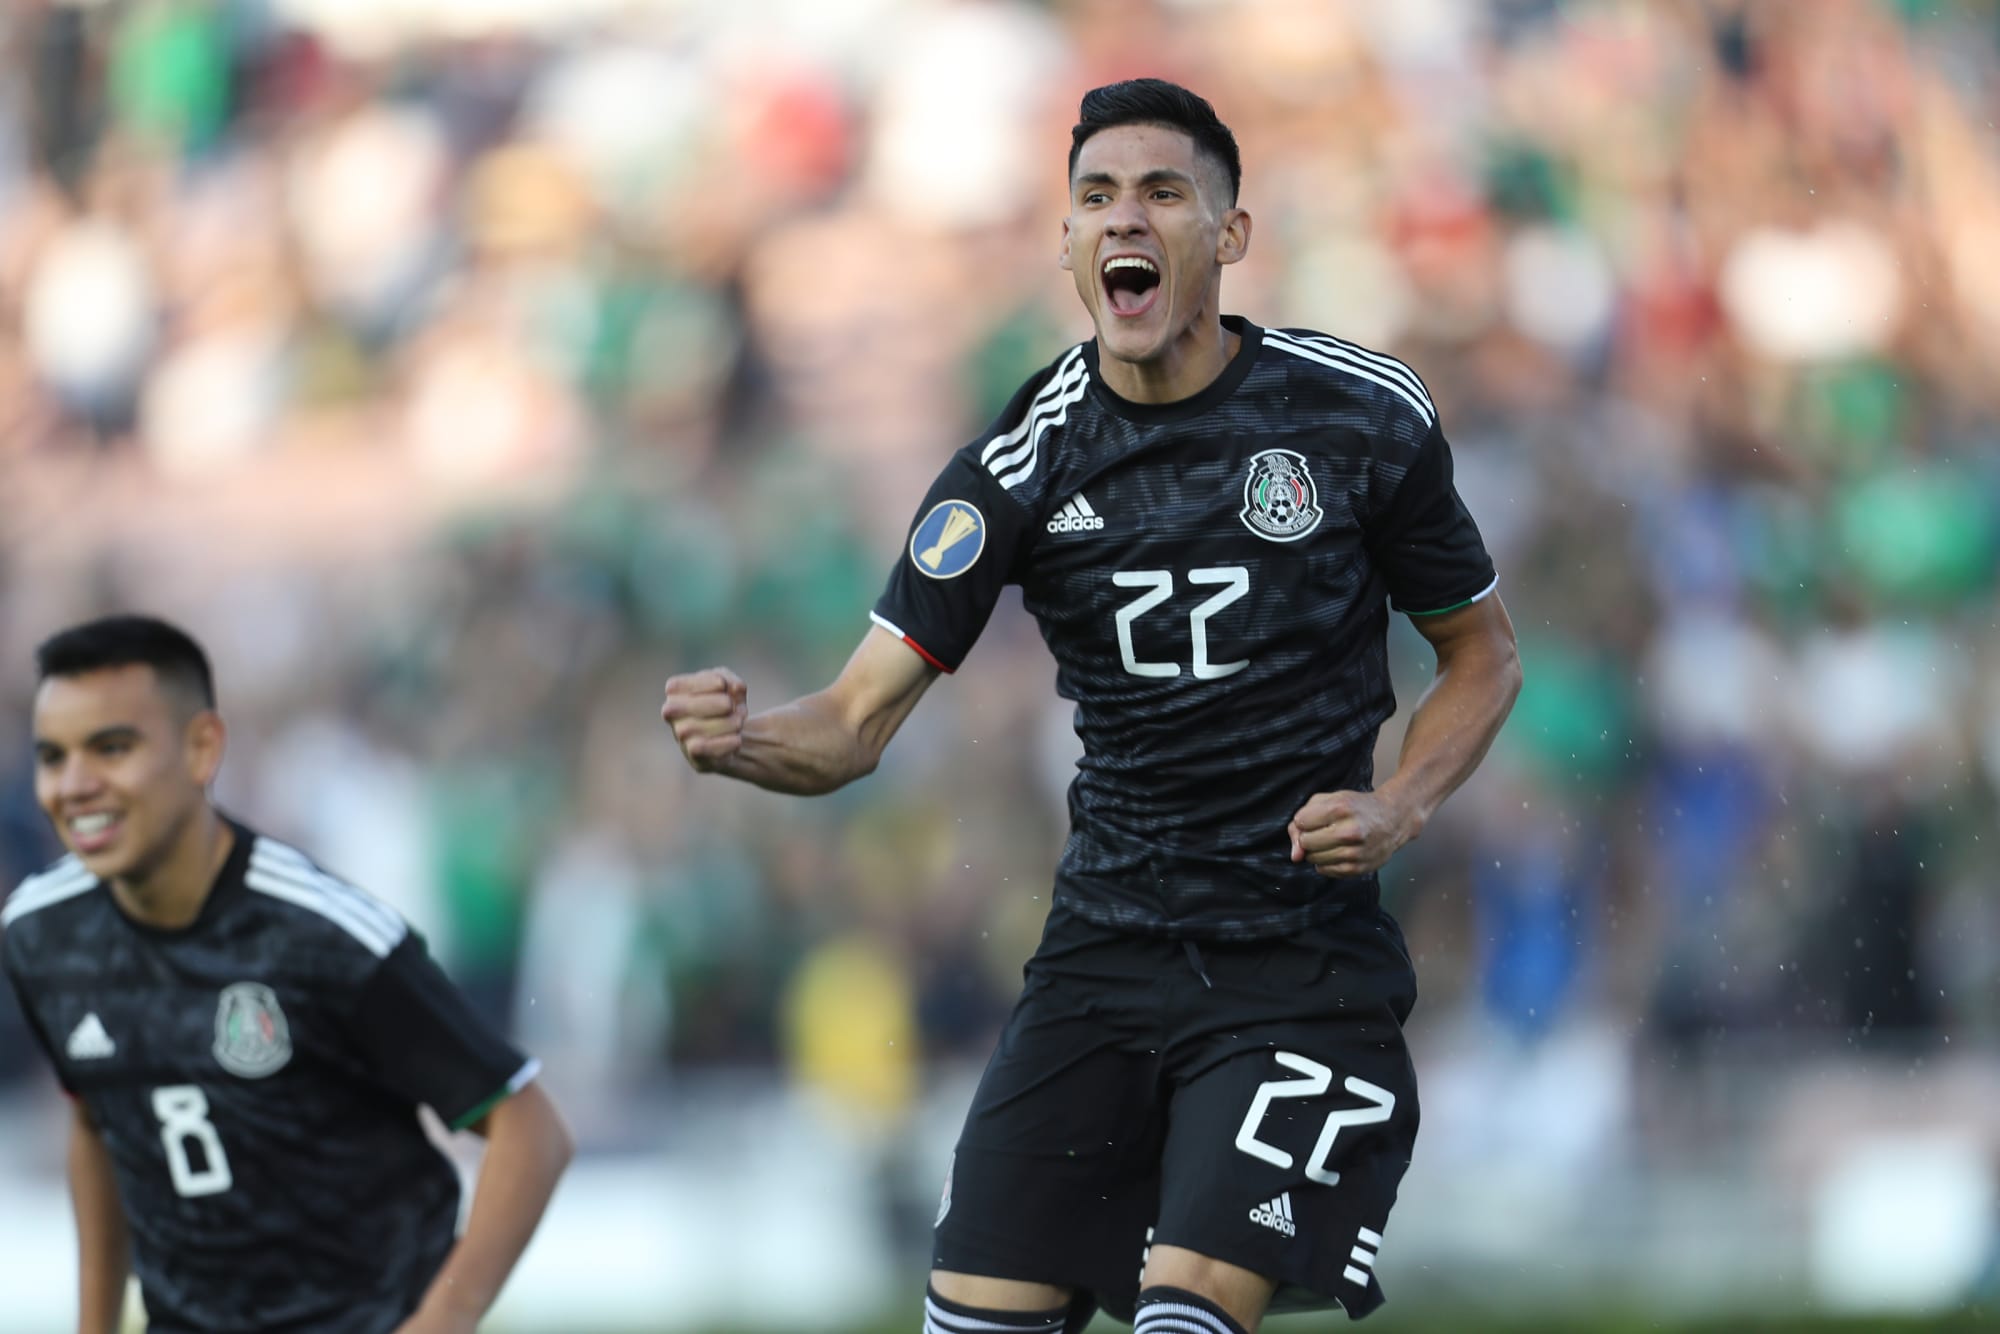 LA Galaxy Uriel Antuna thrives in Gold Cup debut with Mexico